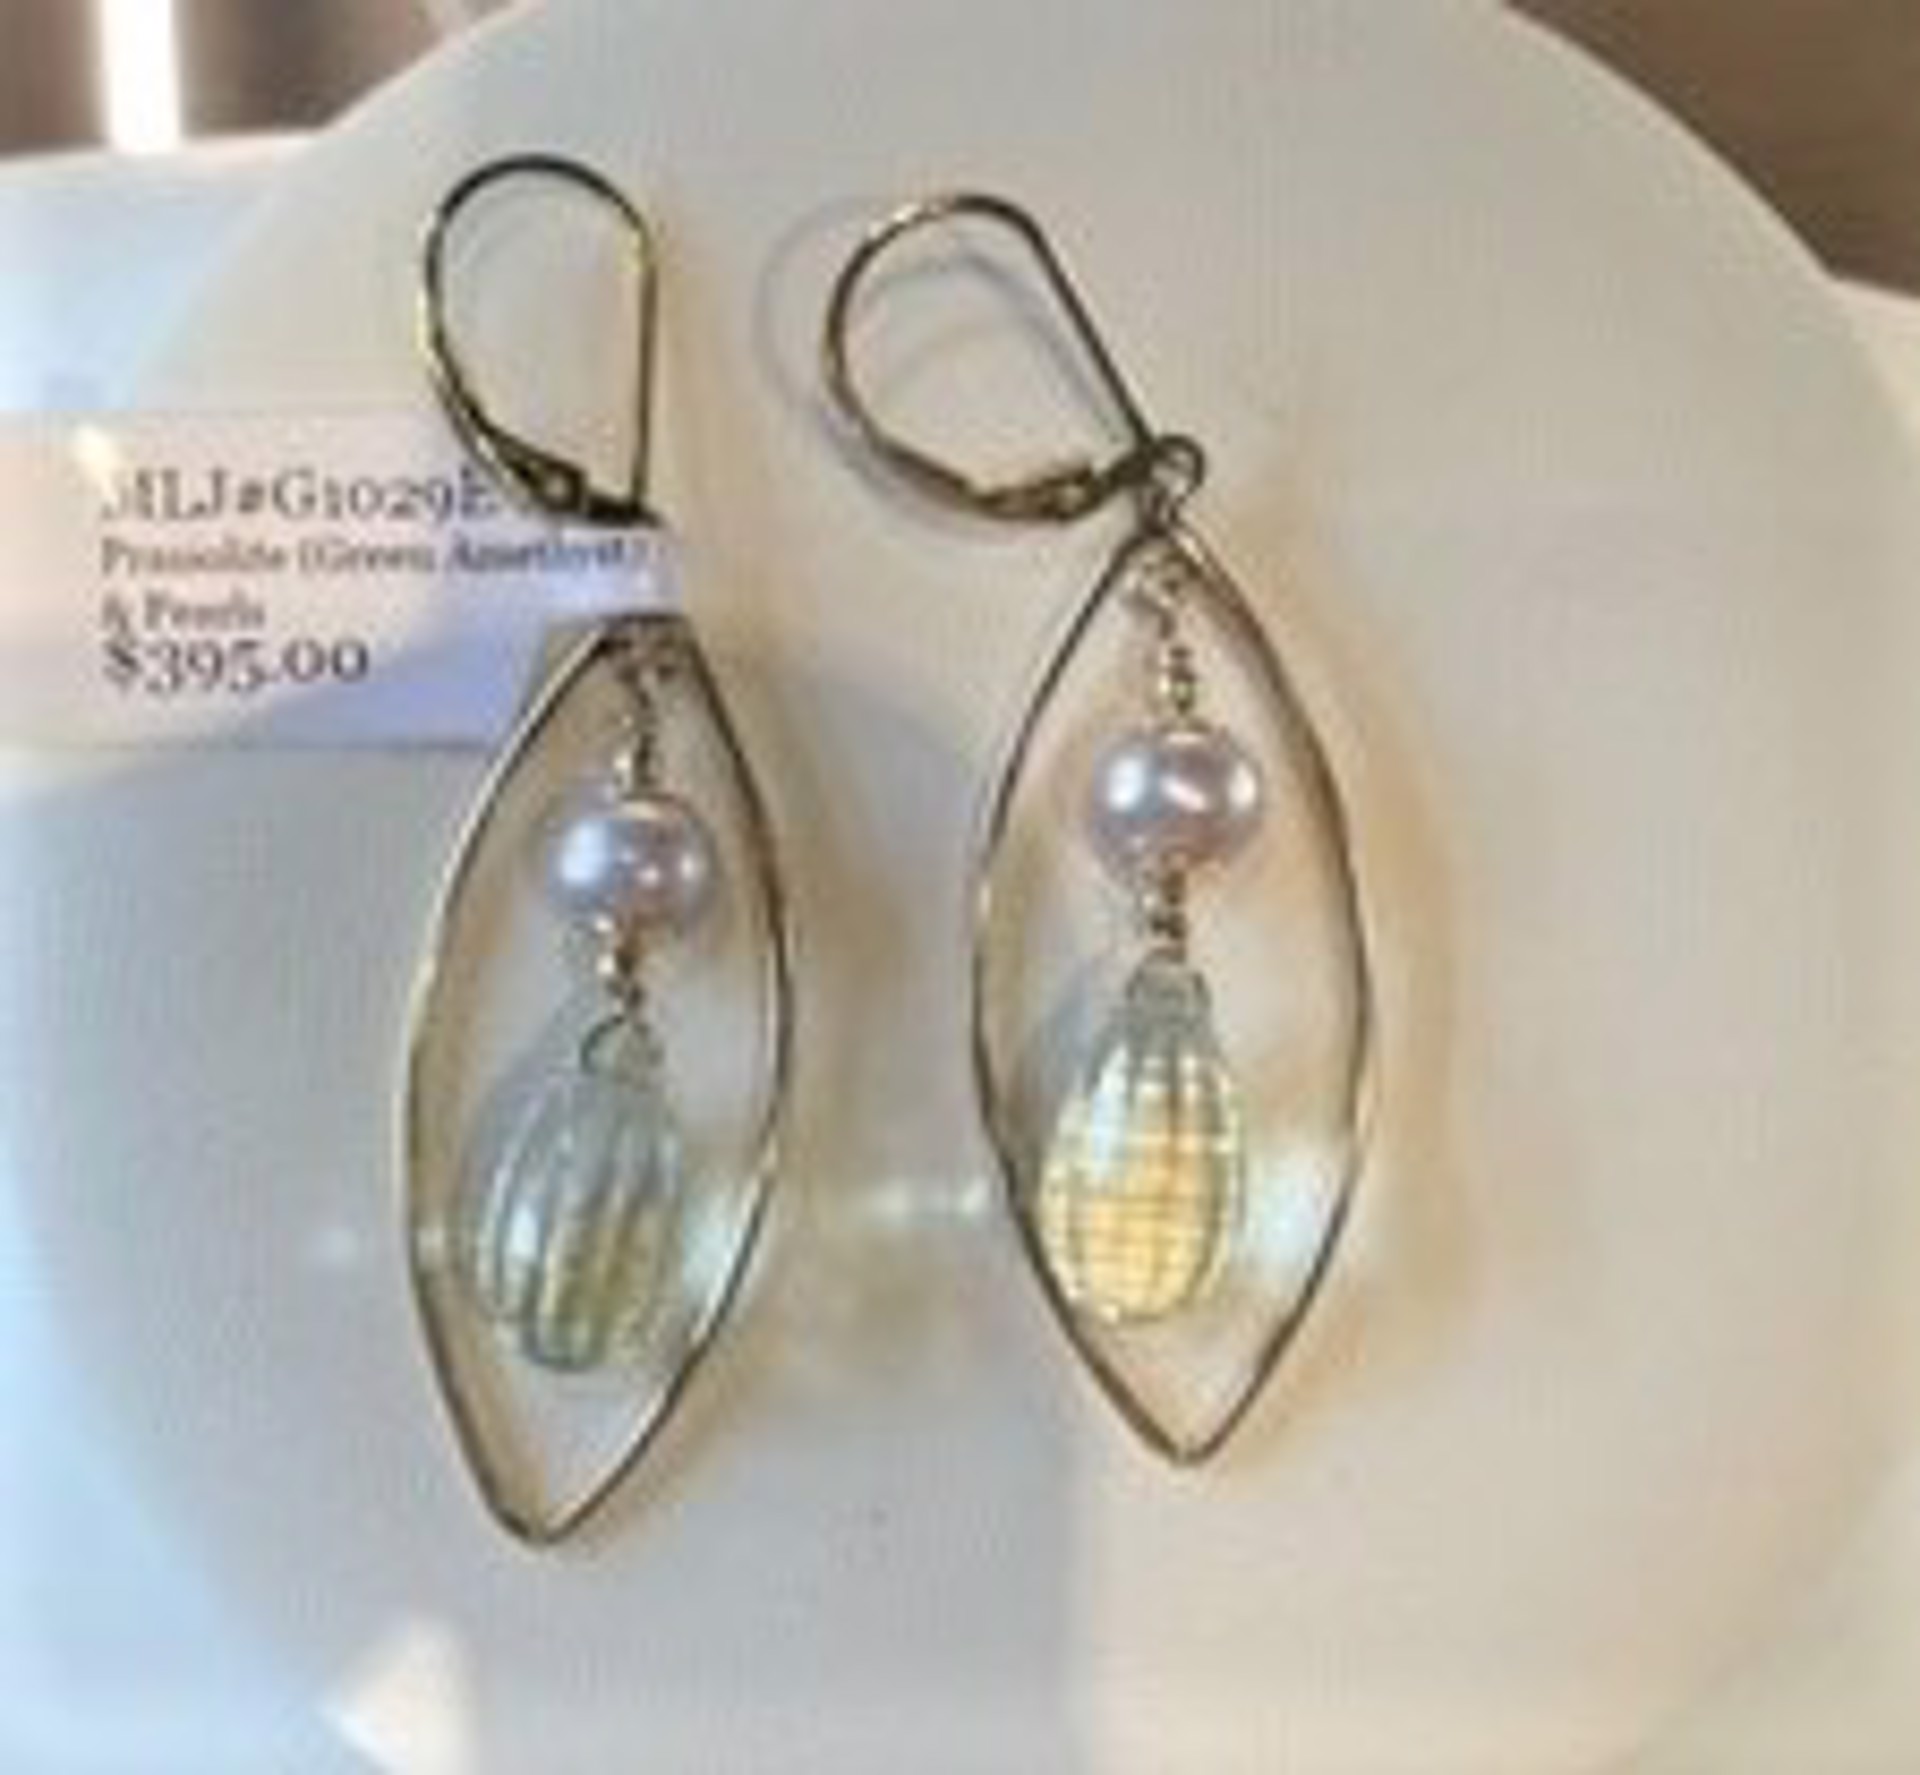 Checkerboard cut prasiolite (green amethyst) briolettes with pearls in marquise shaped 14k gold-filled hoops by Melinda Lawton Jewelry